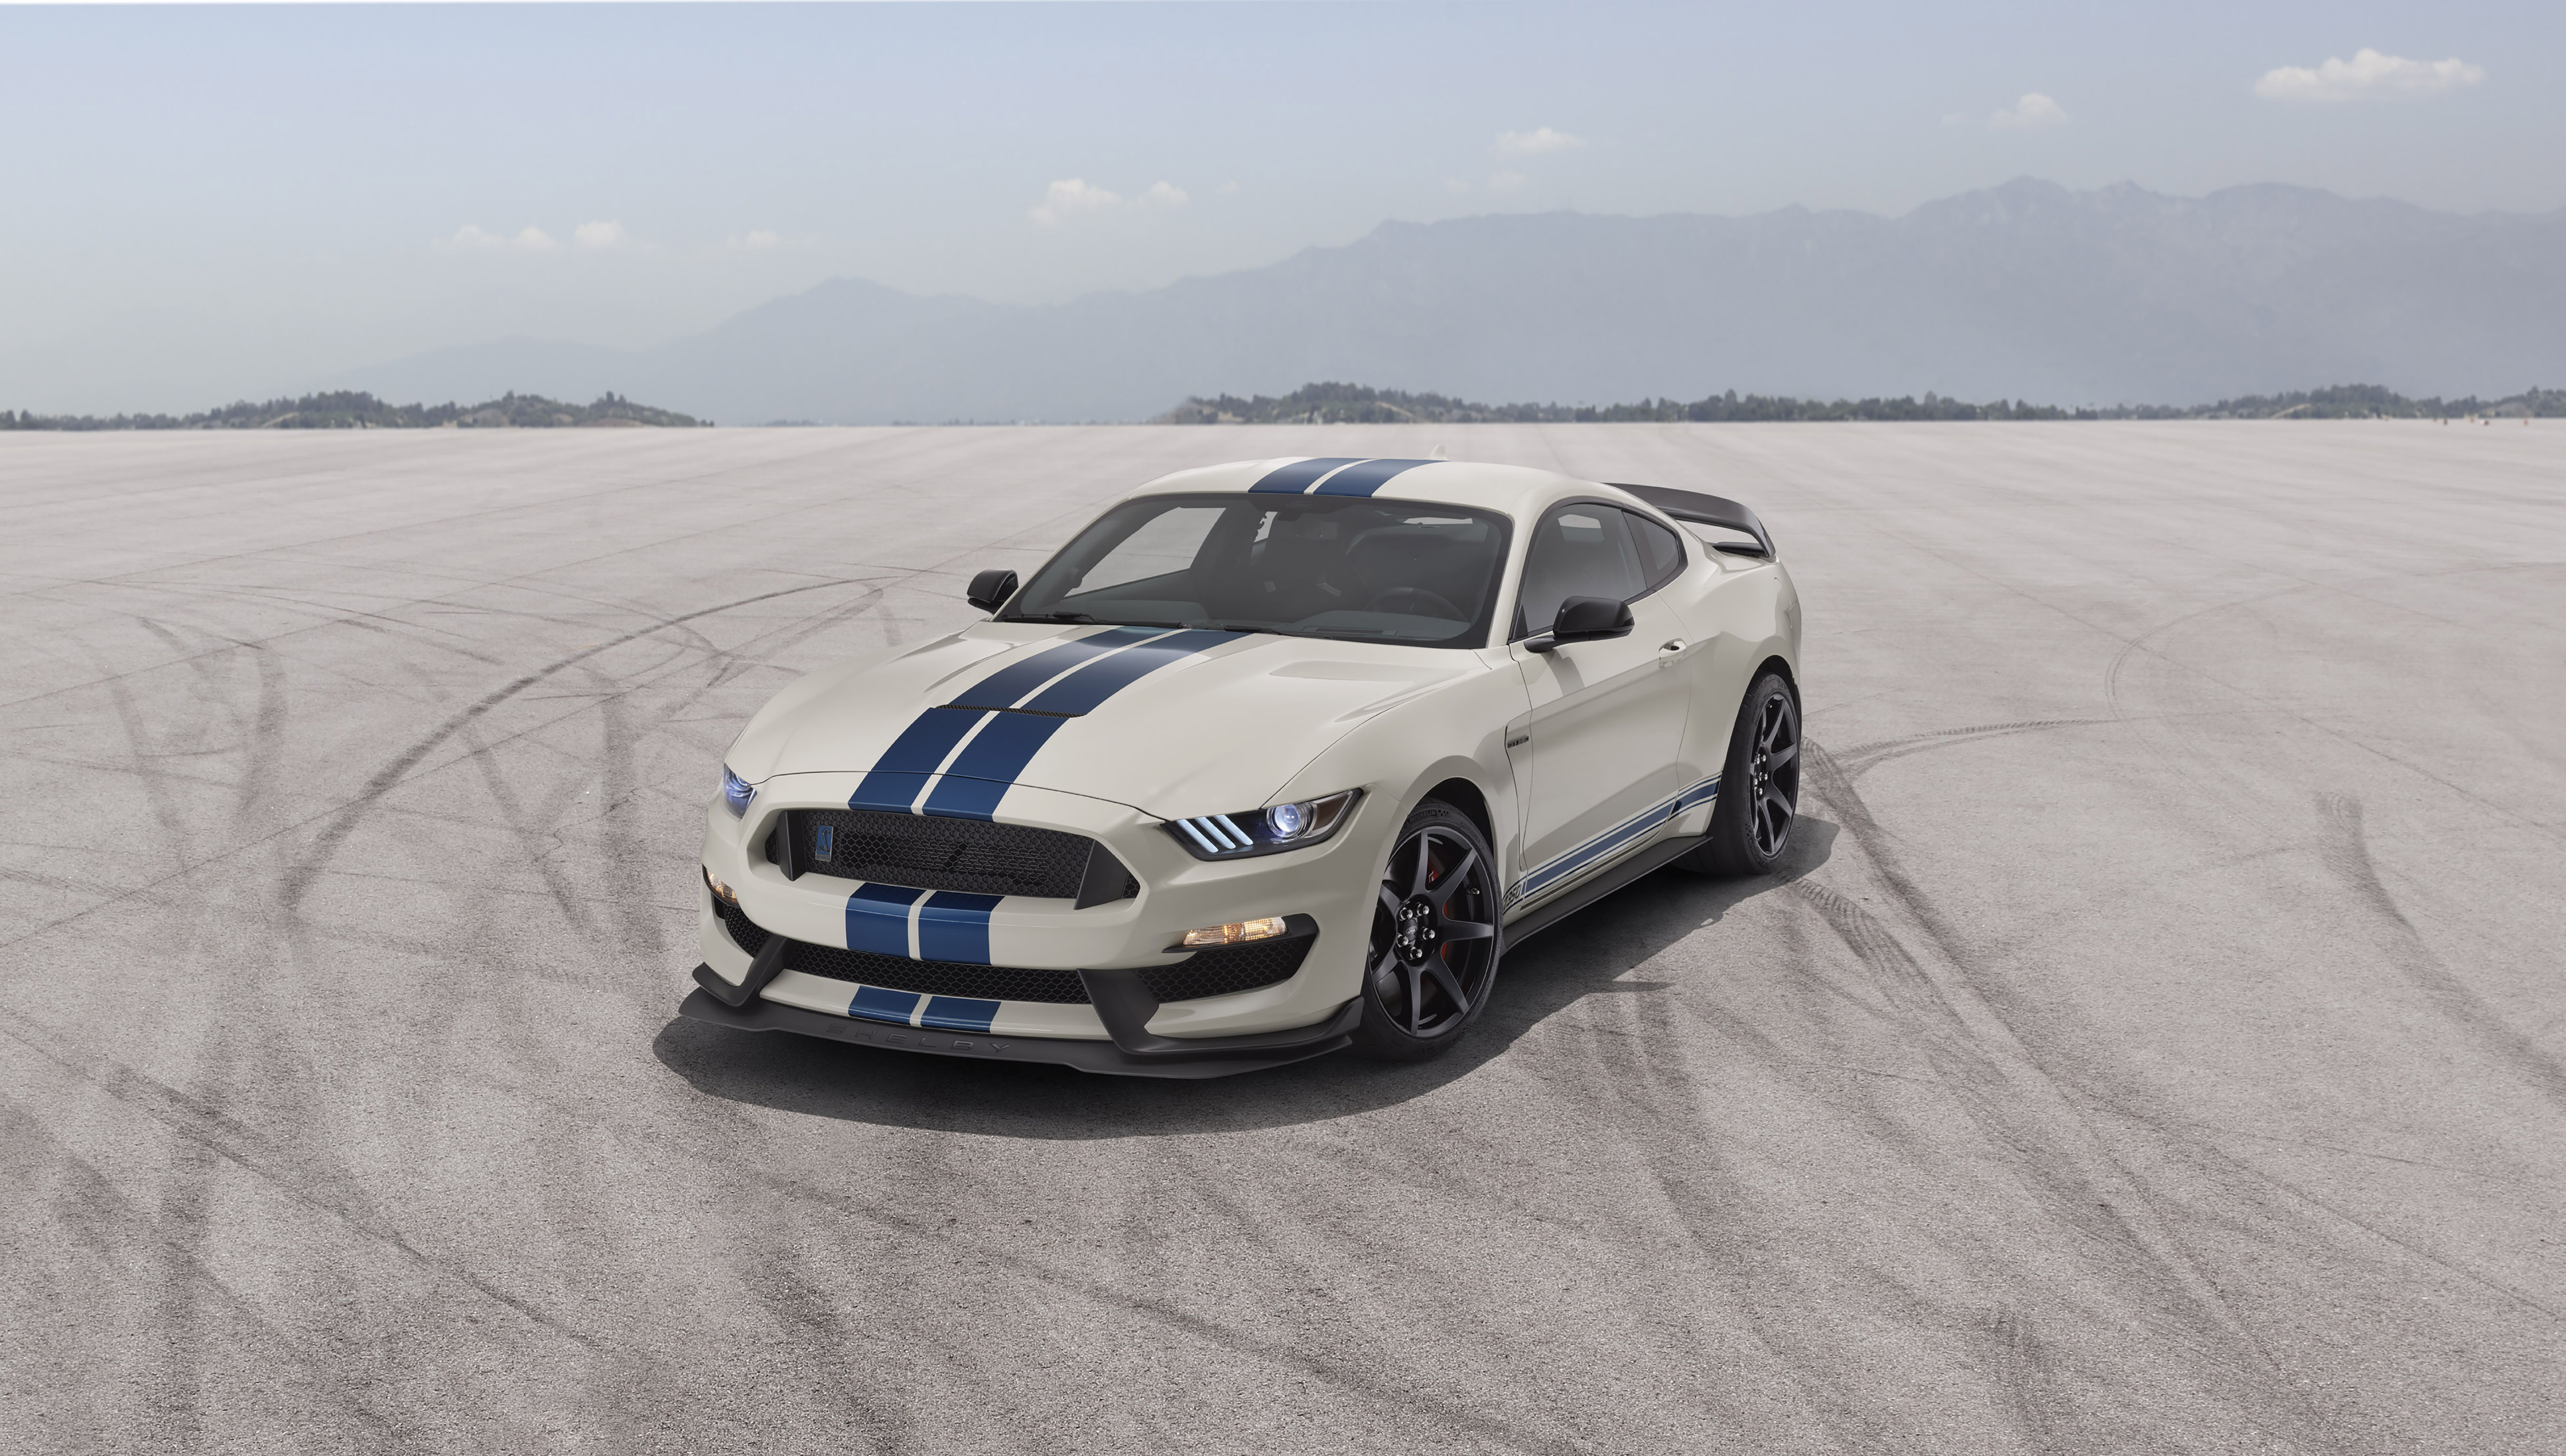 Free download wallpaper Ford, Car, Ford Mustang, Muscle Car, Vehicles, White Car, Ford Mustang Shelby, Ford Mustang Shelby Gt350 on your PC desktop